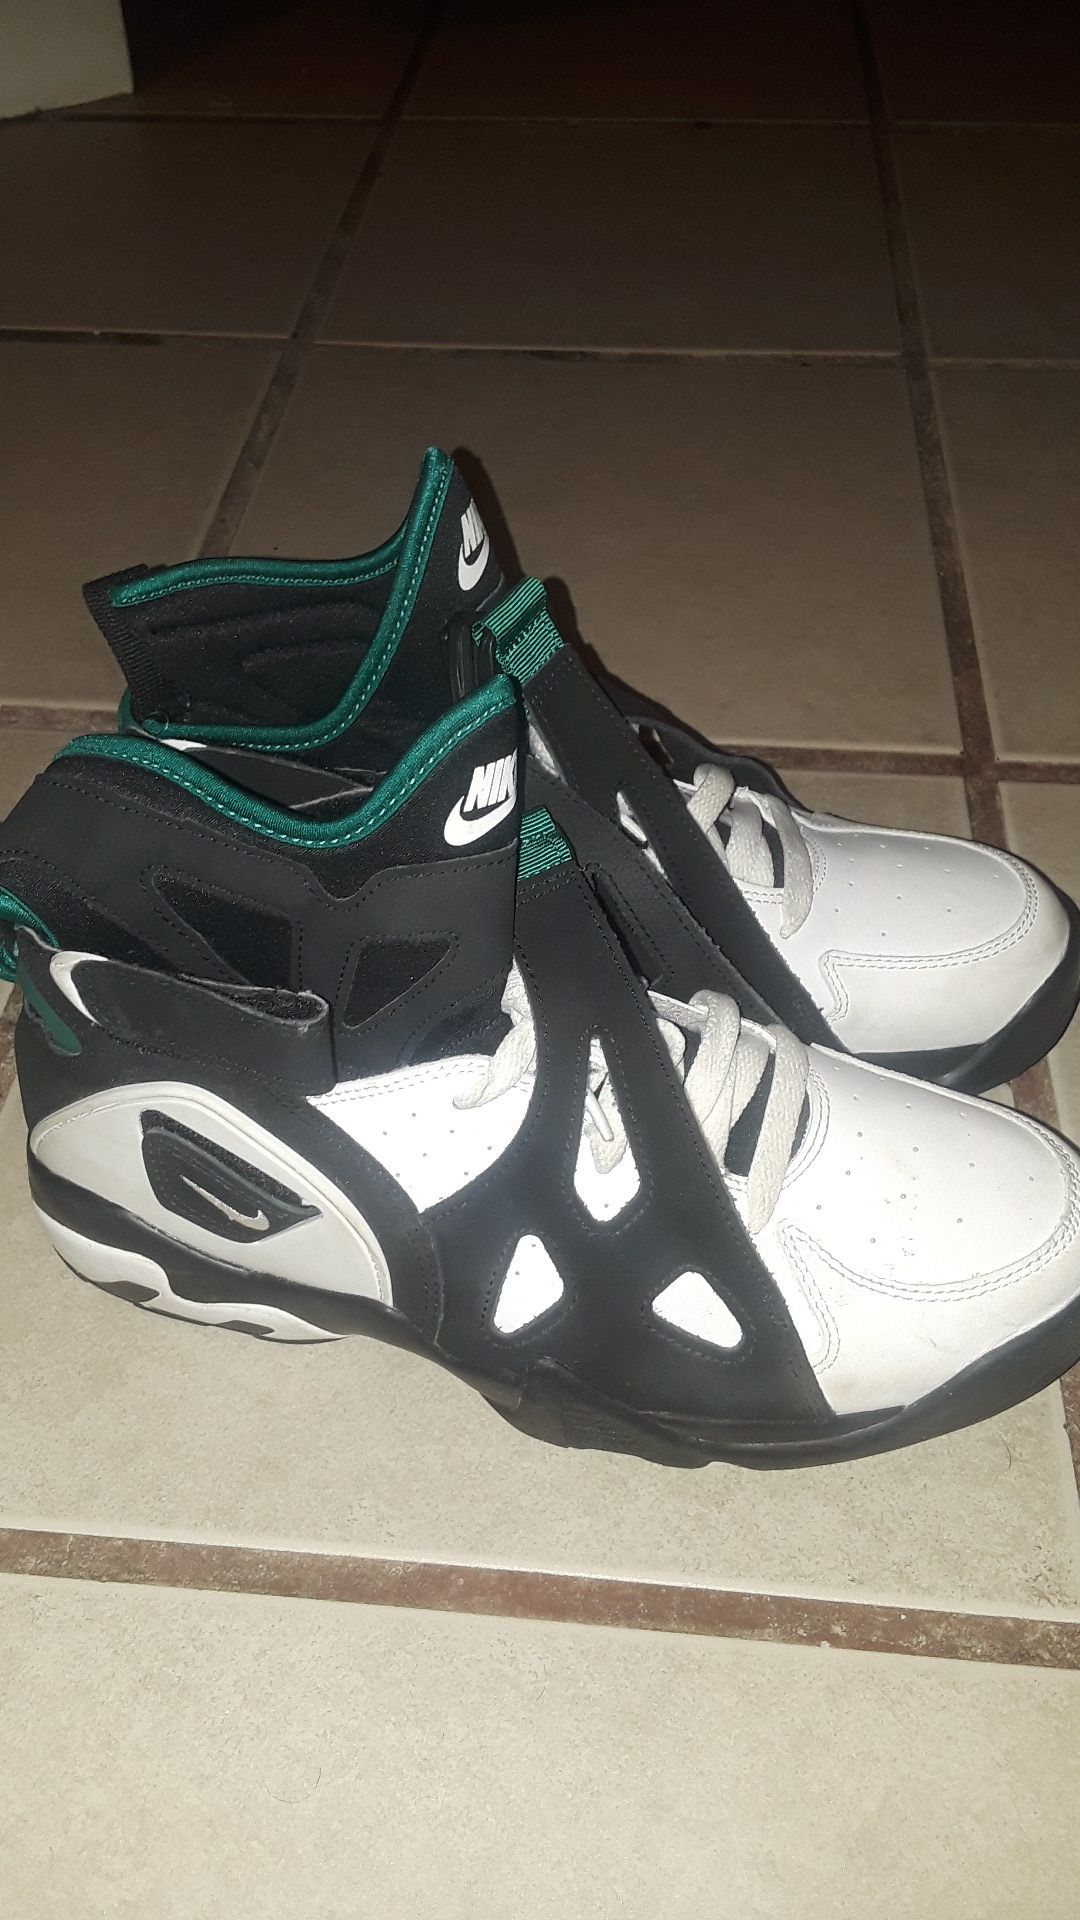 NIKE air unlimited size 8